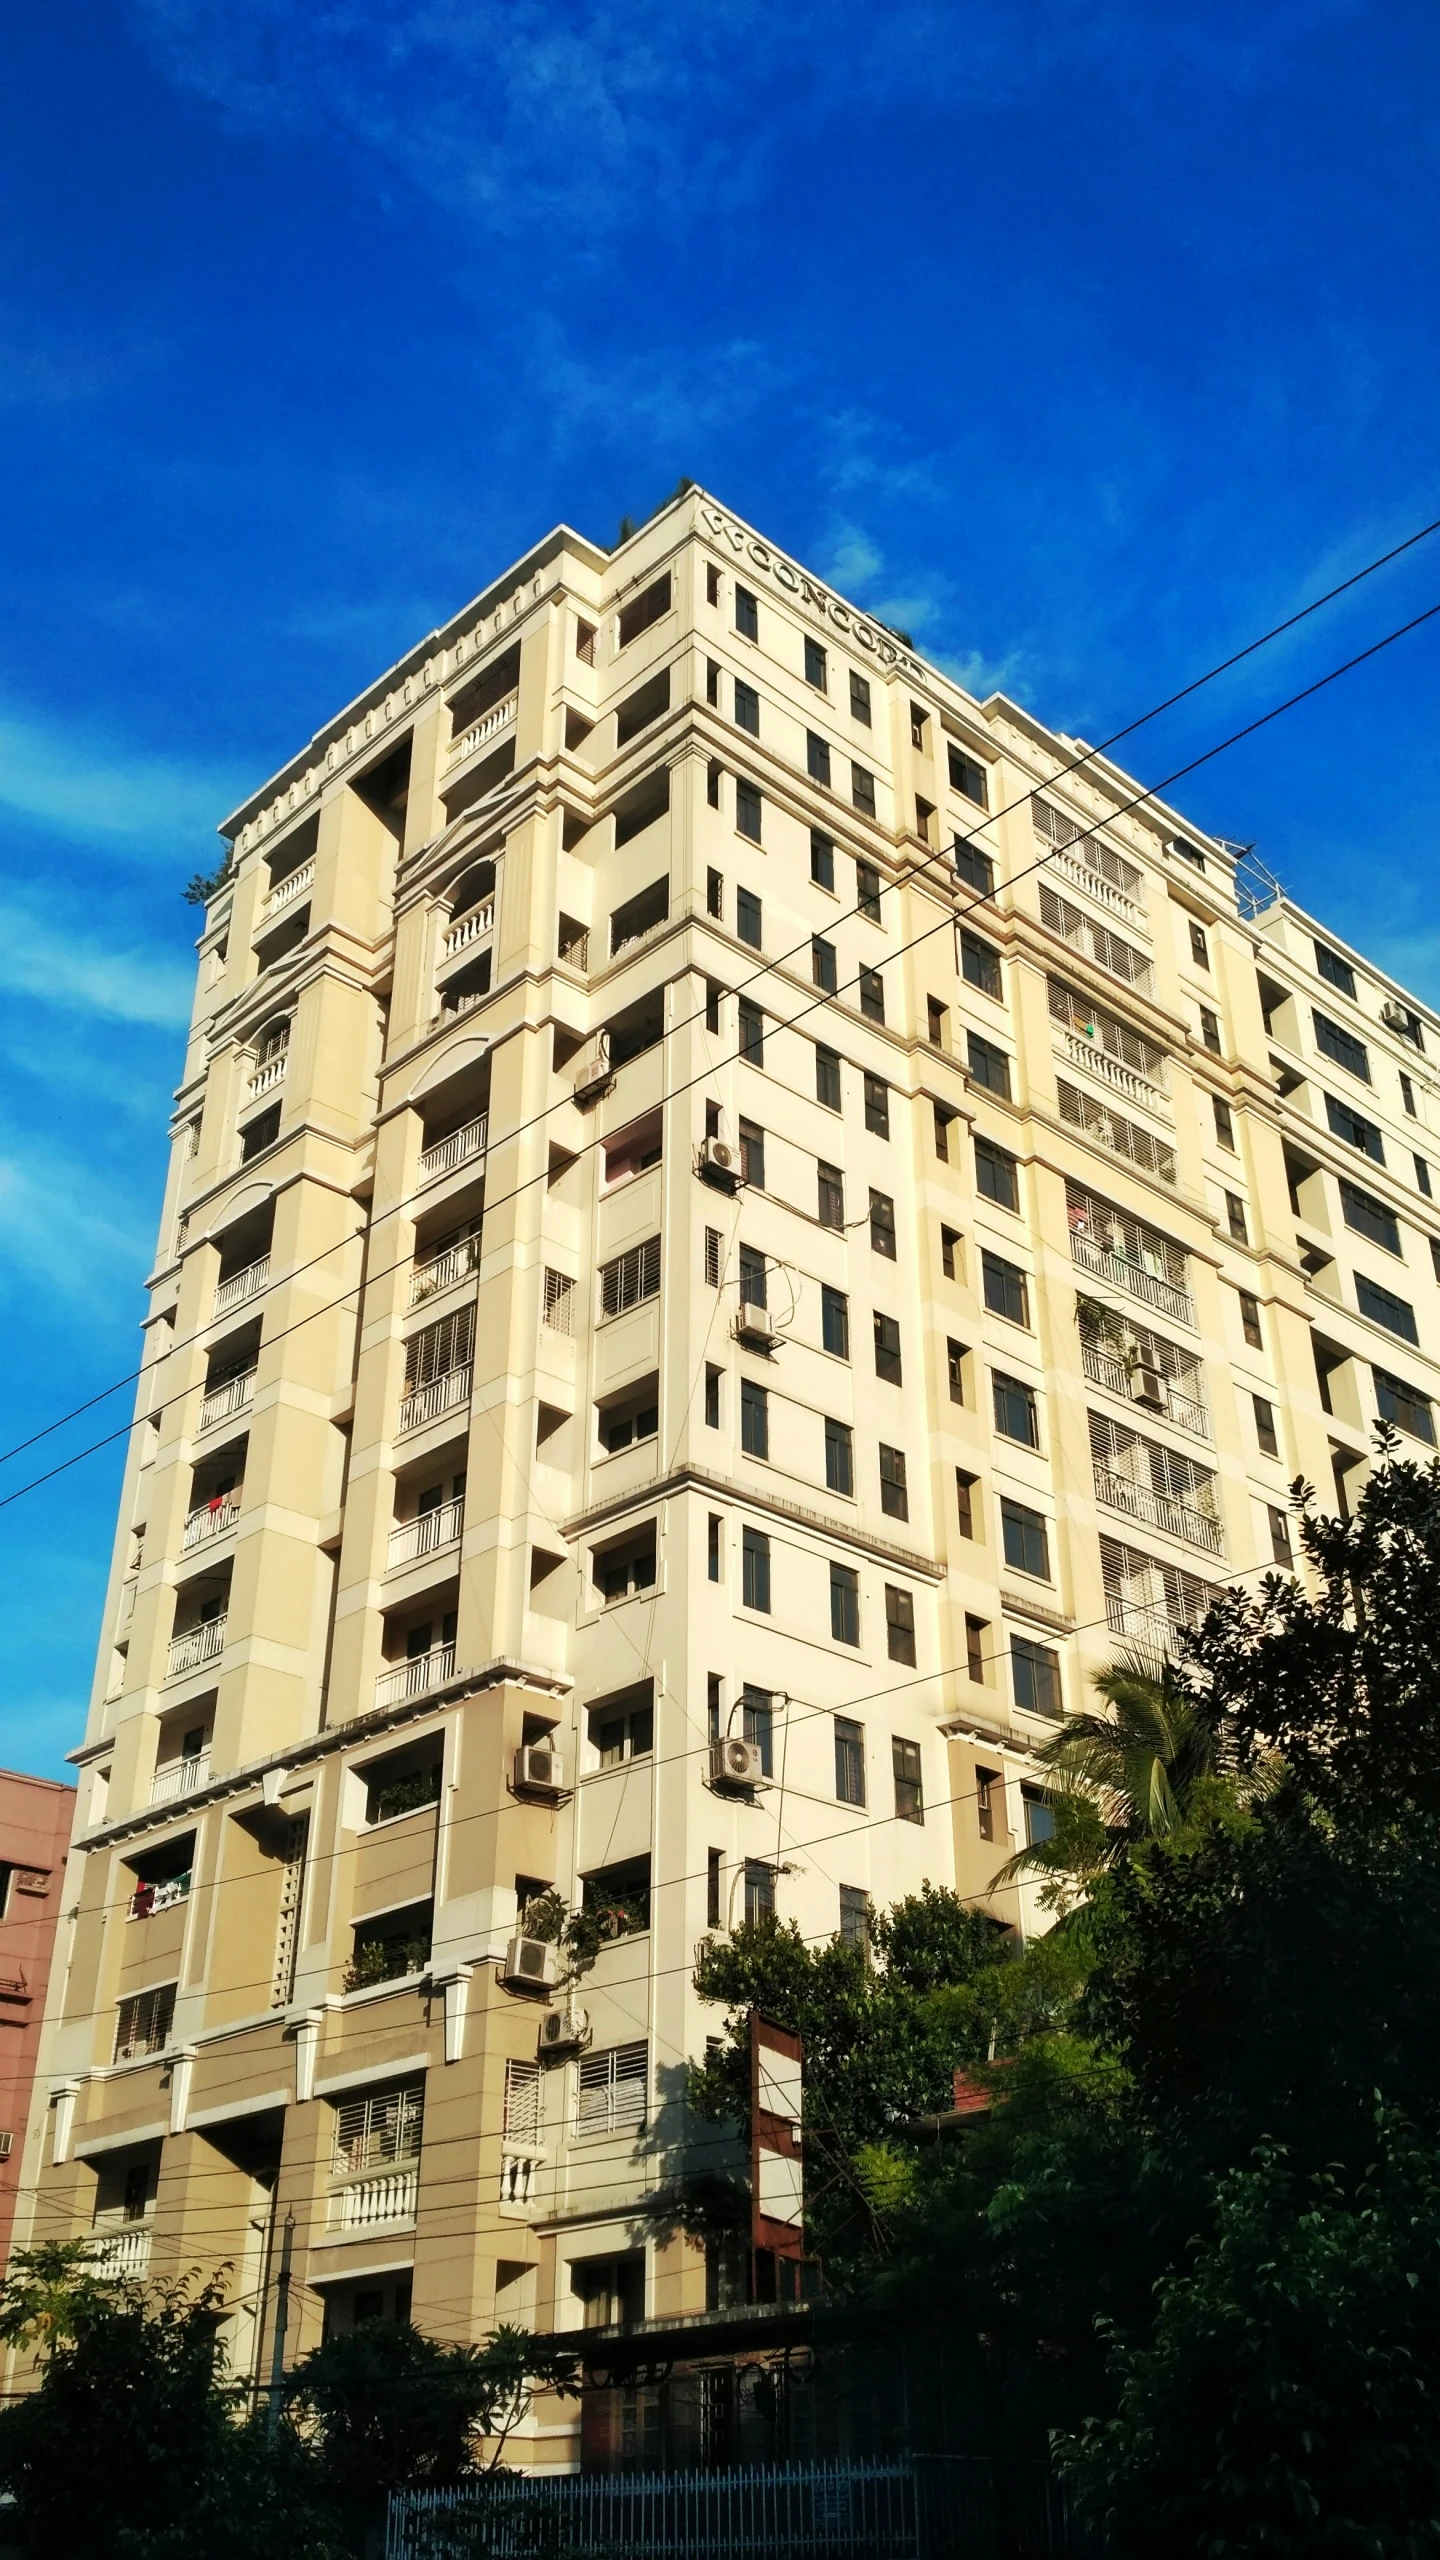 a tall building has balconies on the sides